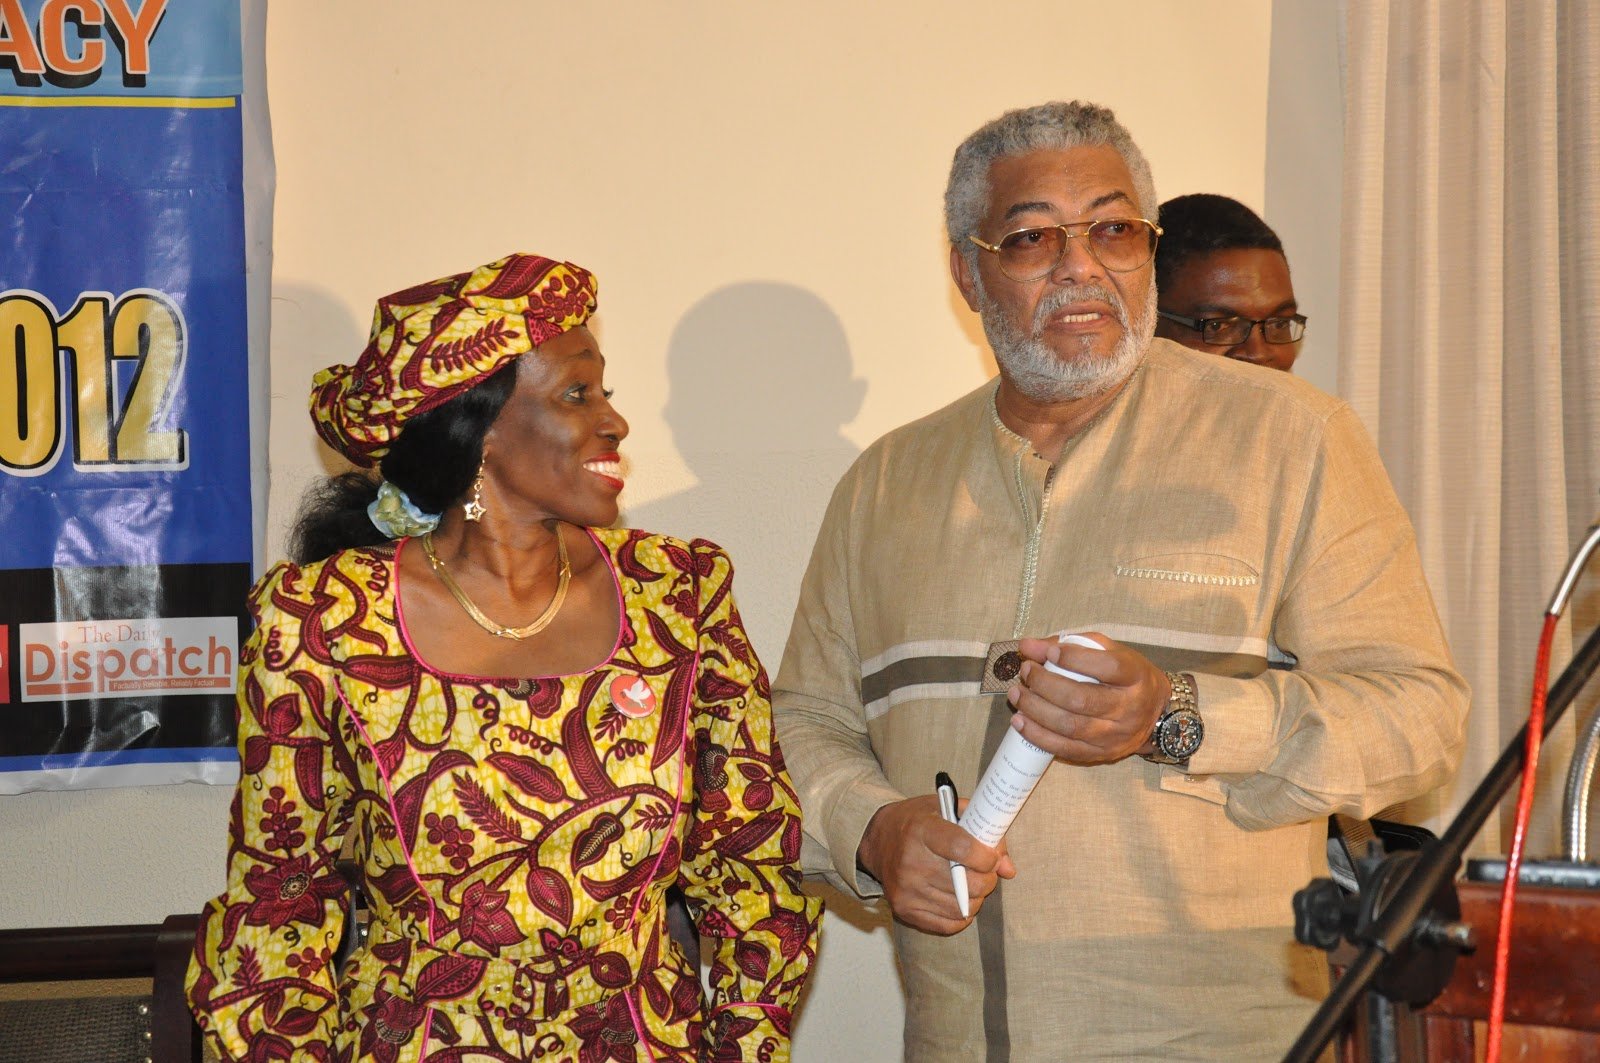 Photos of Late JJ Rawlings and his wife Nana Konadu which show they were inseperable